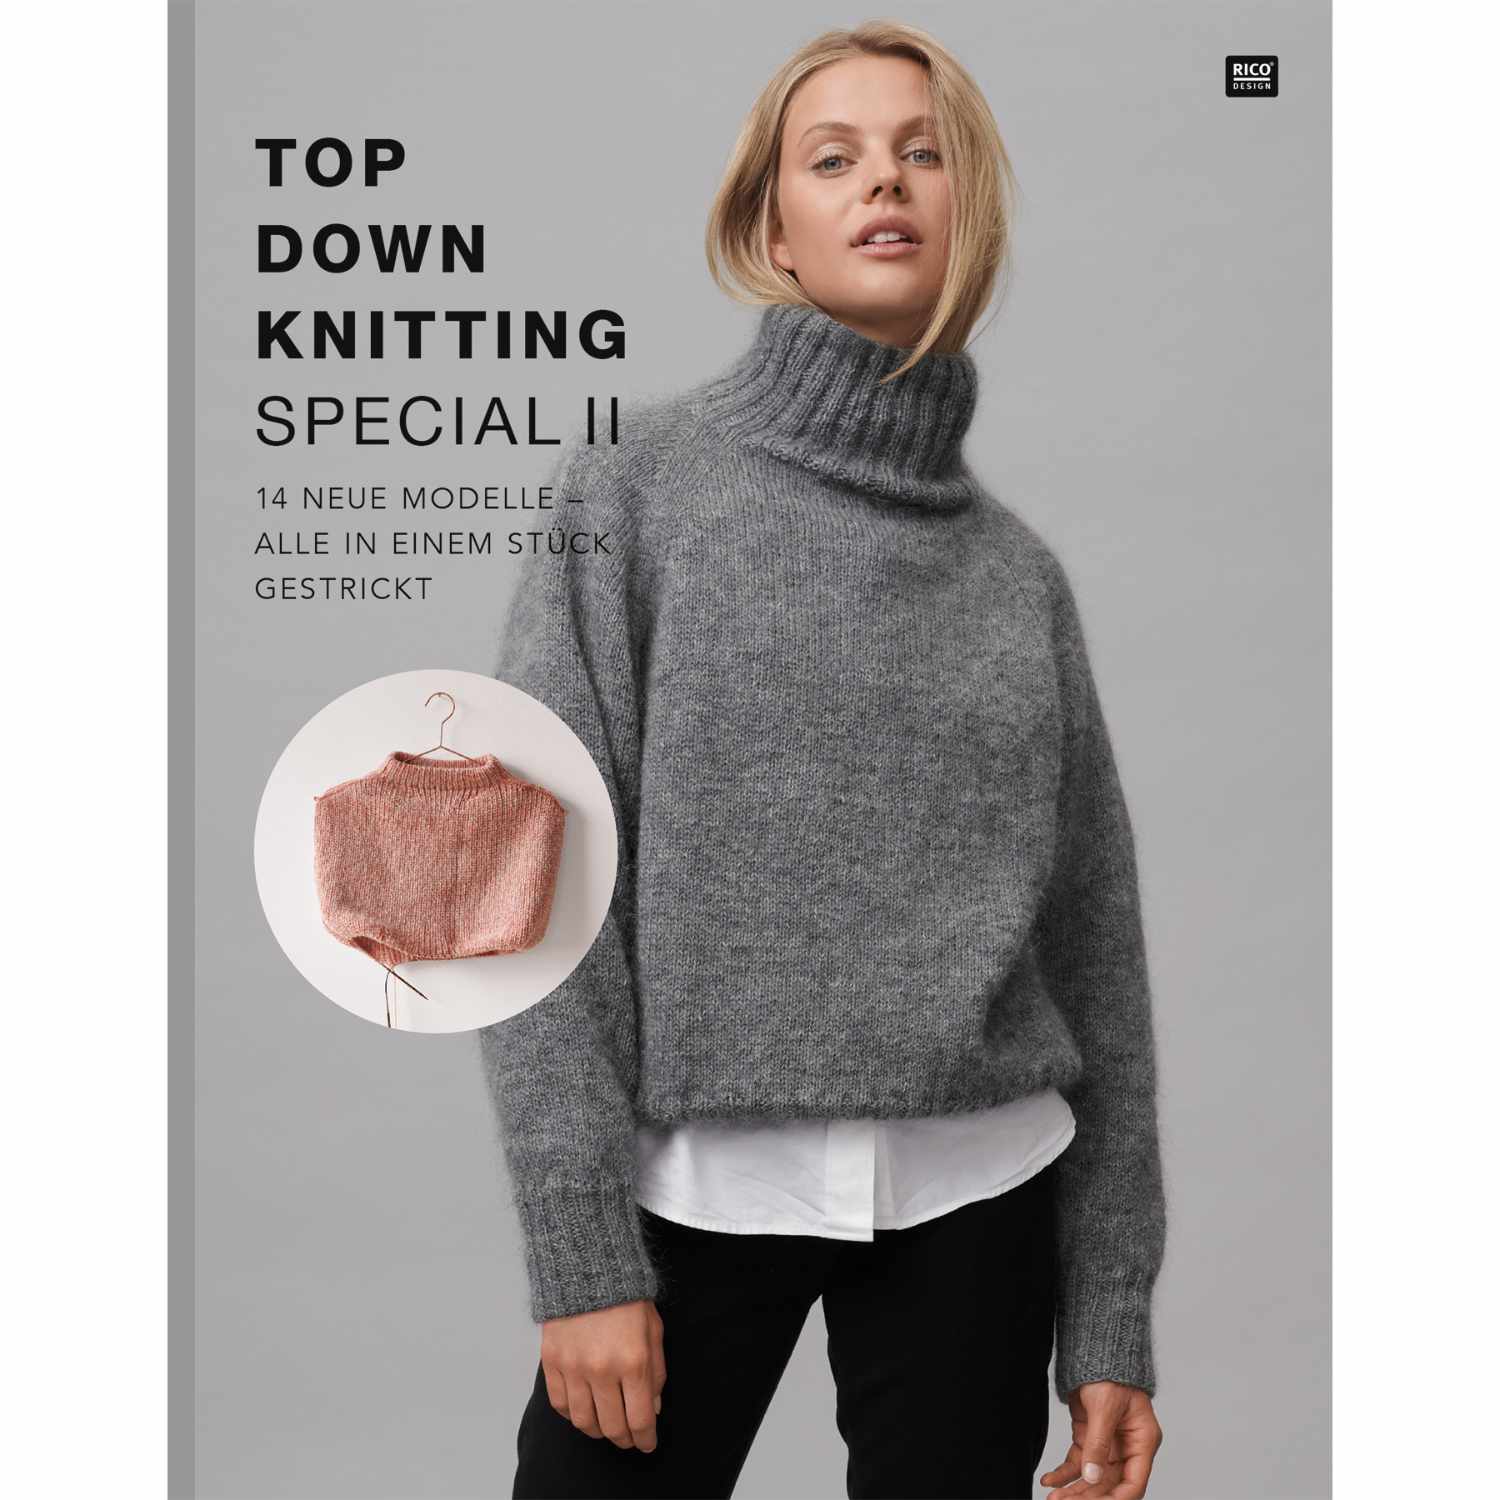 Top Down Knitting Special II